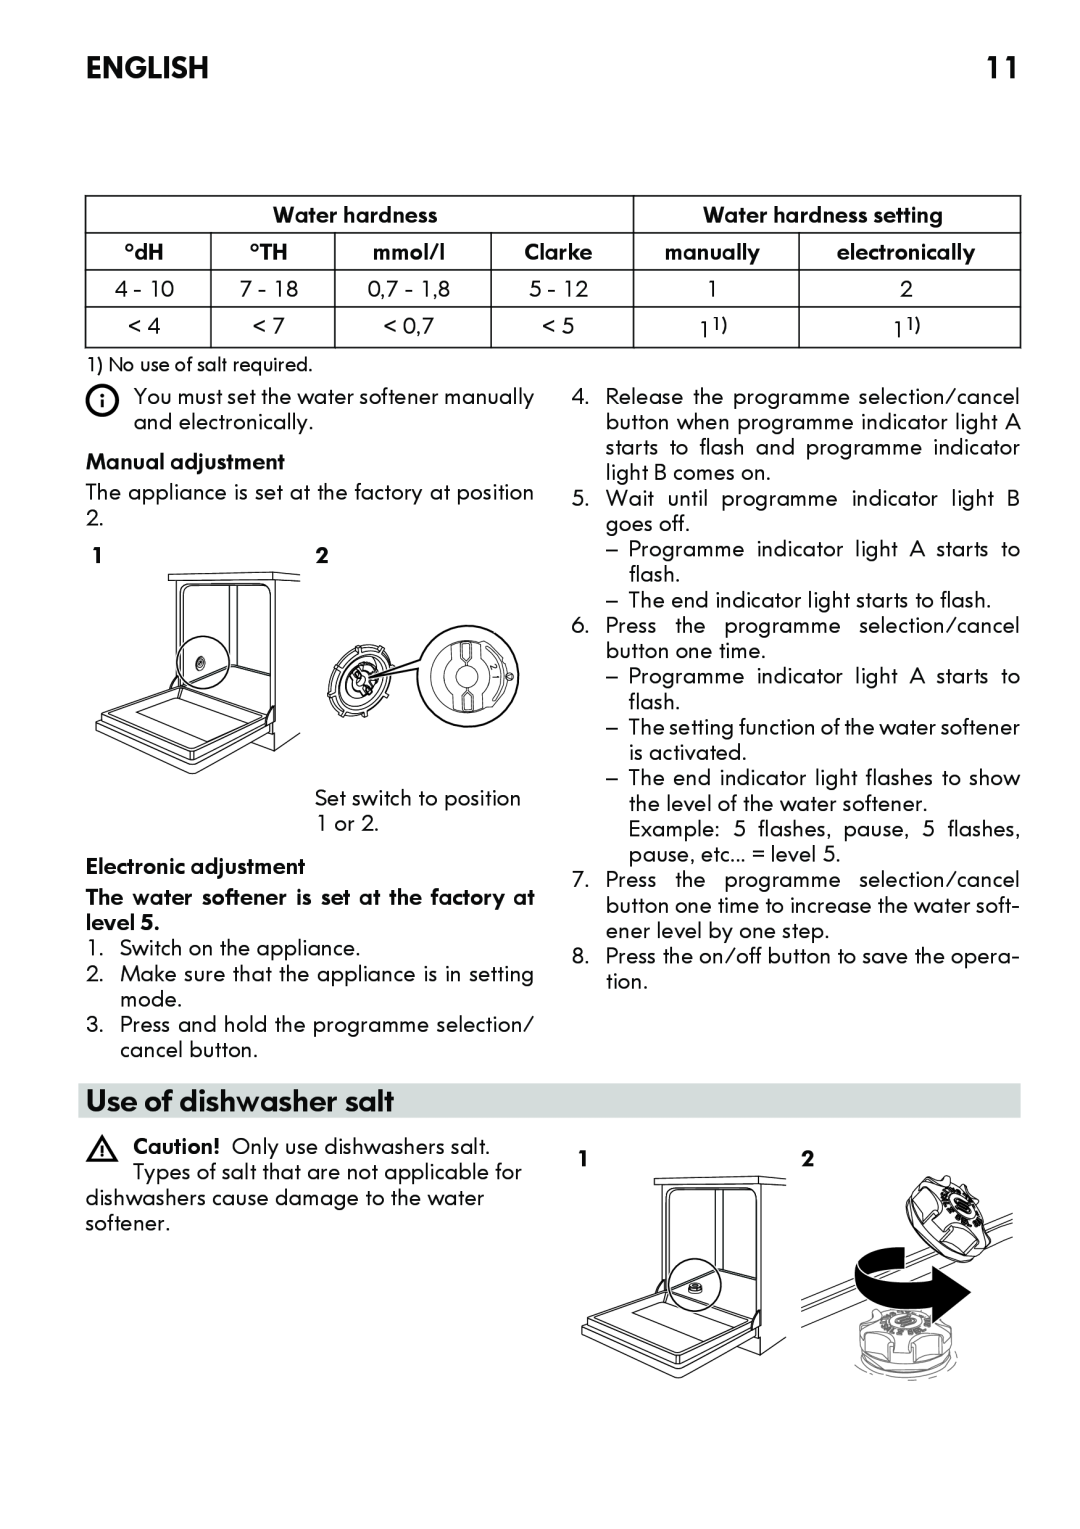 IKEA DW60 manual Use of dishwasher salt, English, No use of salt required 